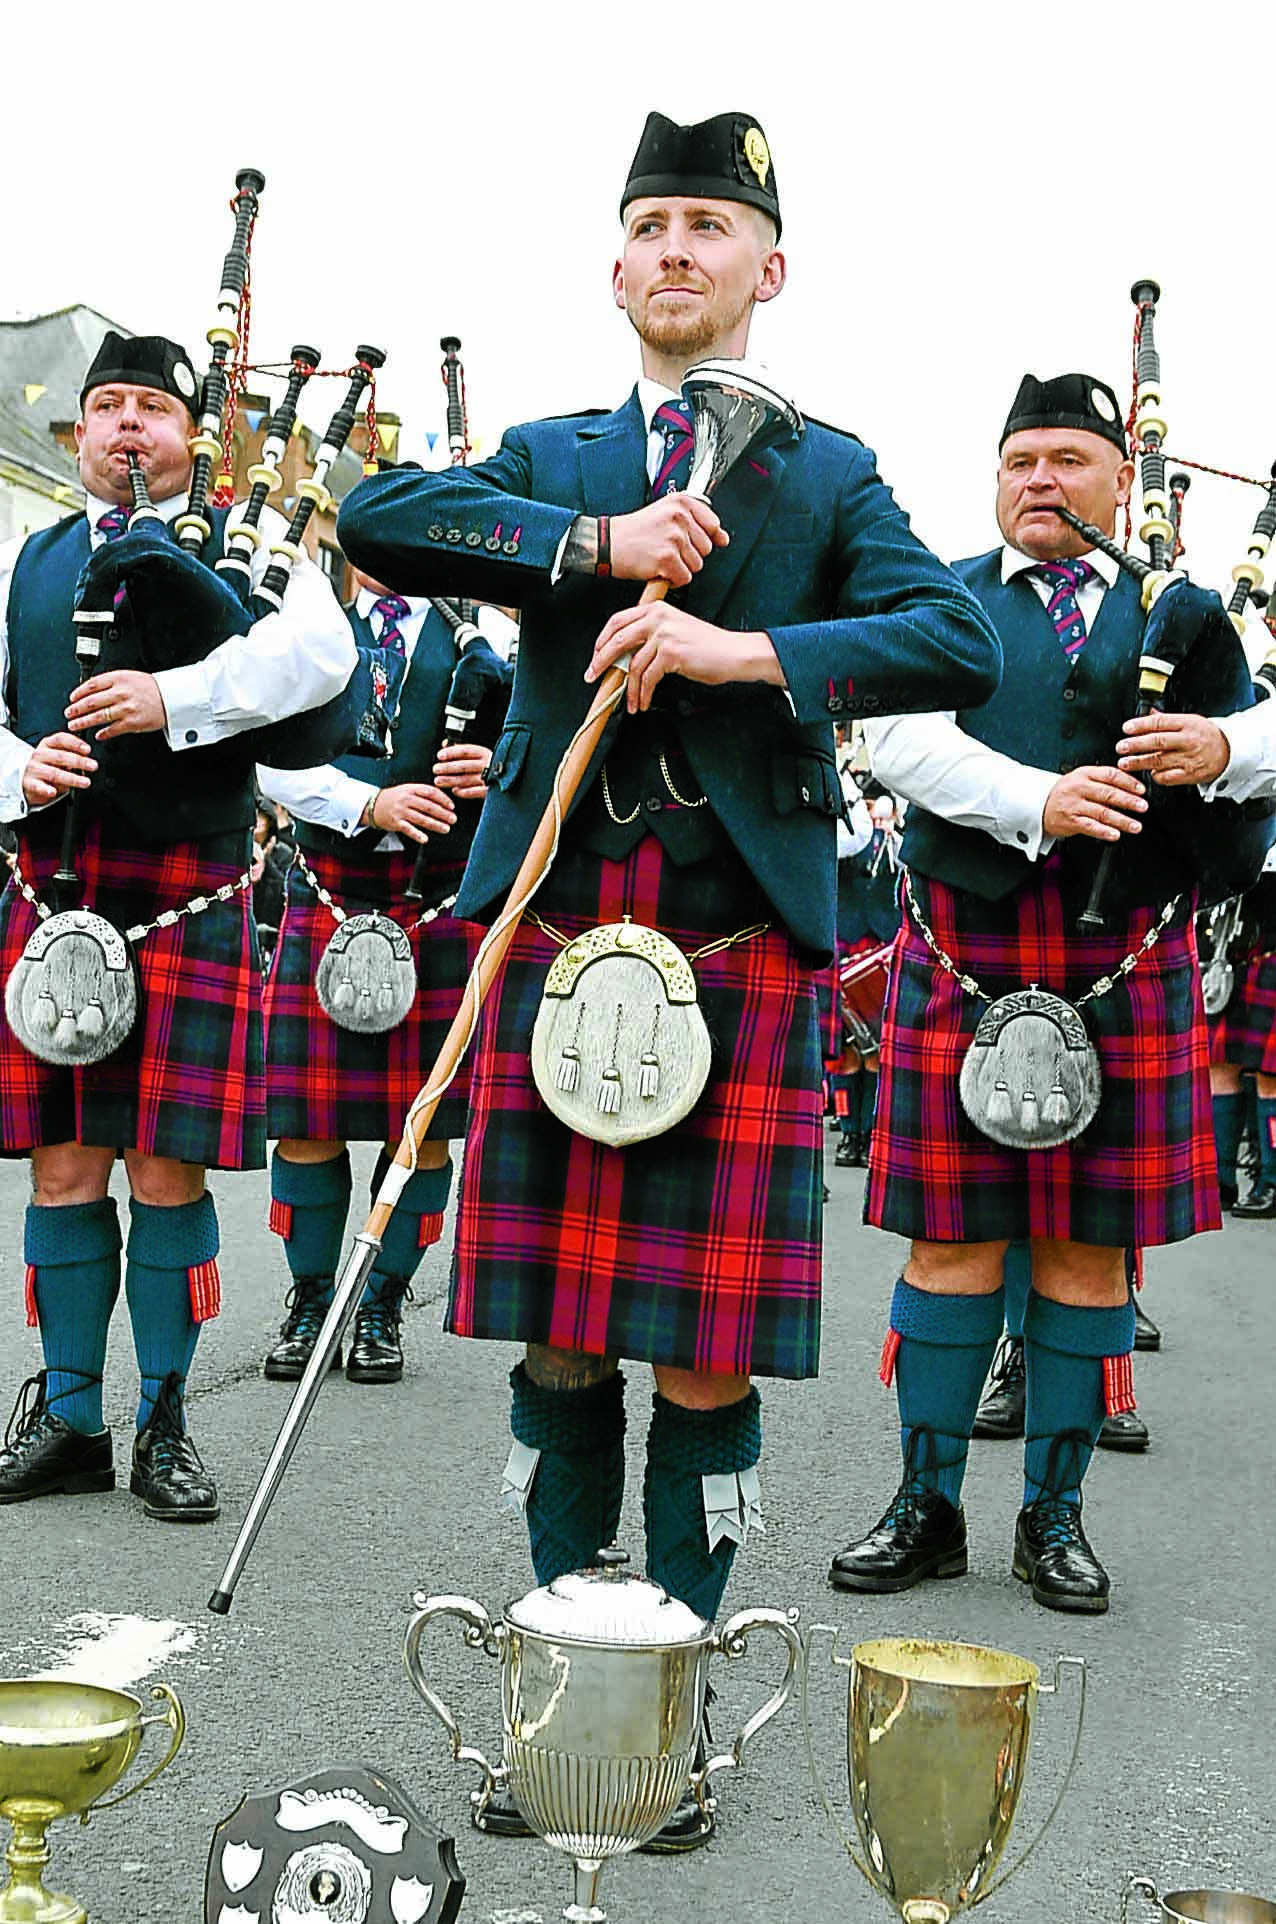 Gibb’s world pipe band champs delight